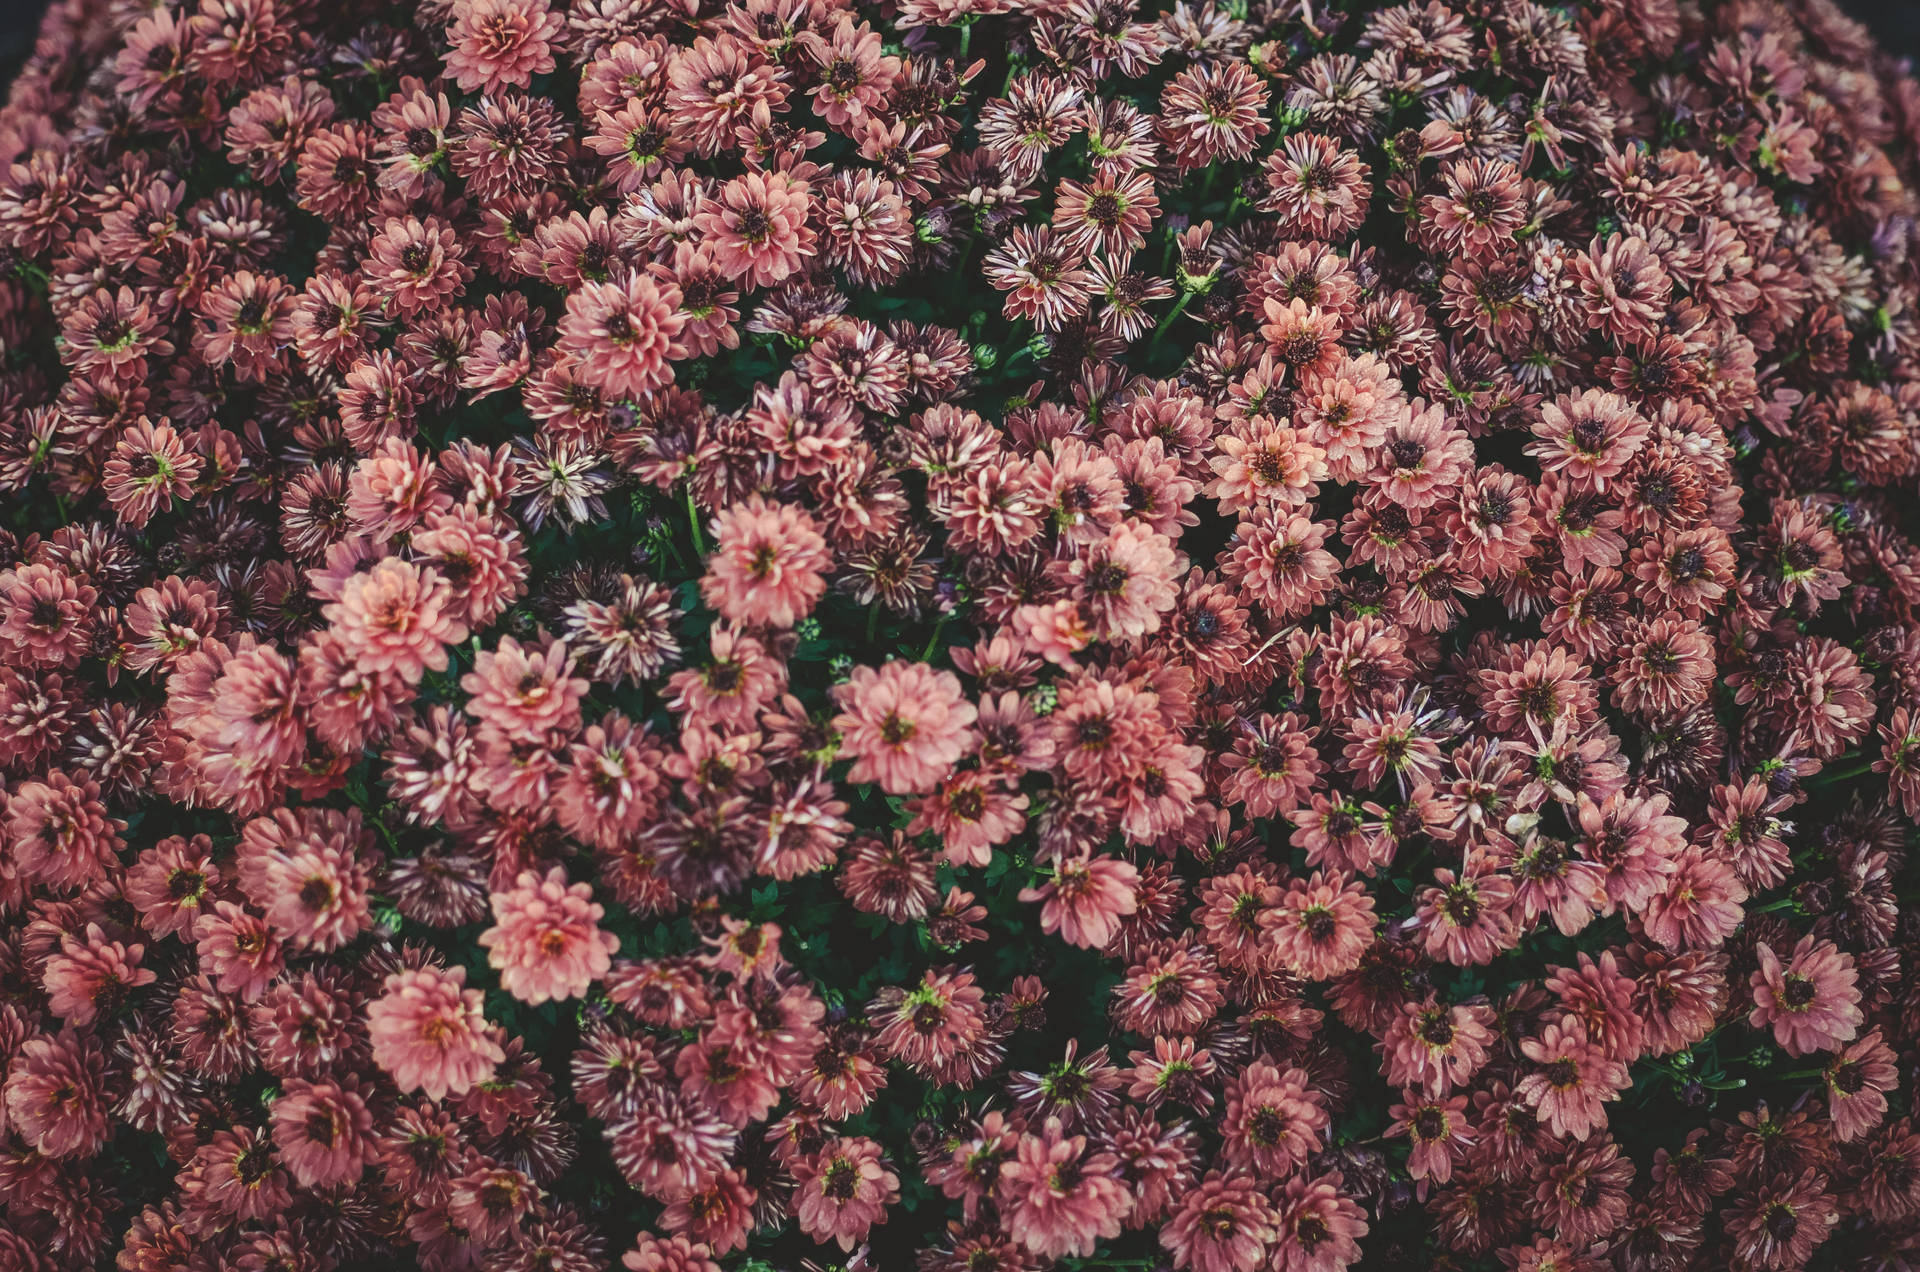 Bed Of Pink Aesthetic Flowers Background